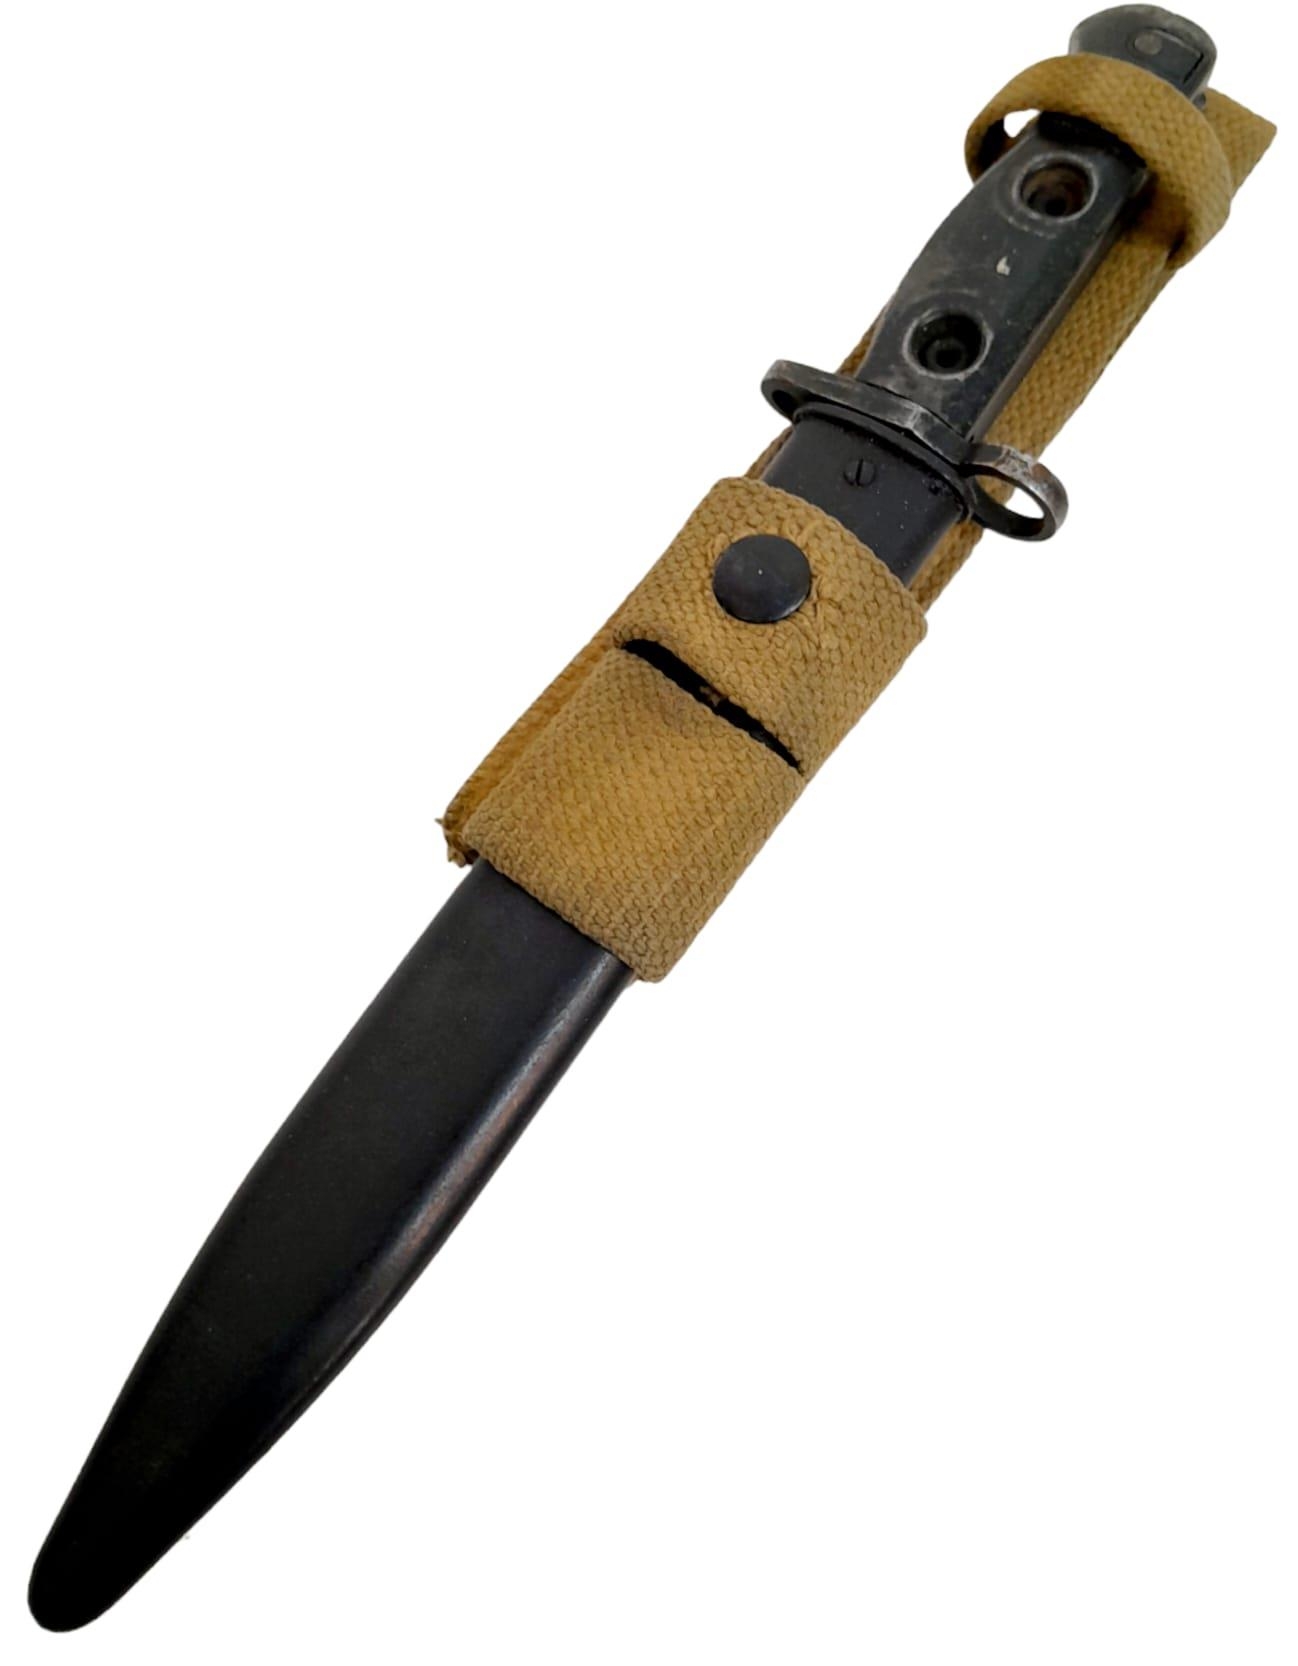 Cold War Period British L1-A3 SLR Bayonet & Frog. Dated 1965. - Image 2 of 4